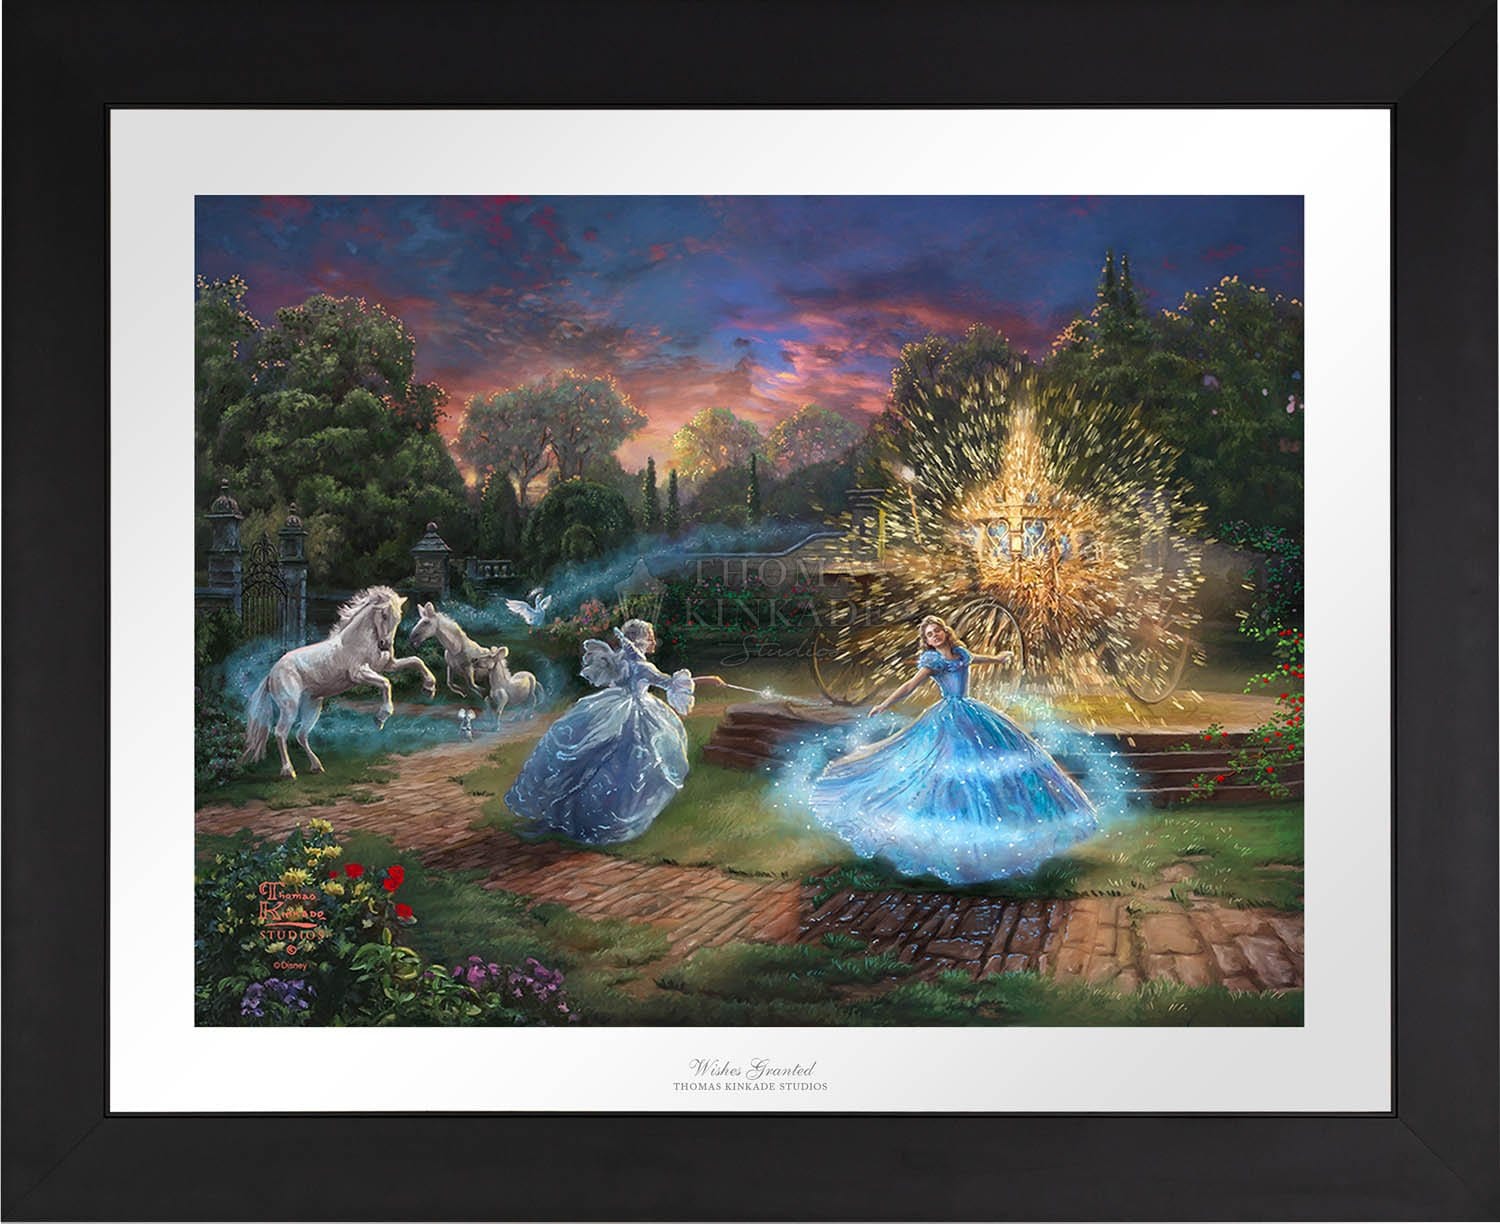 Wishes Granted features Cinderella's enchanted transformation with the help of her Fairy Godmother - Black Frame